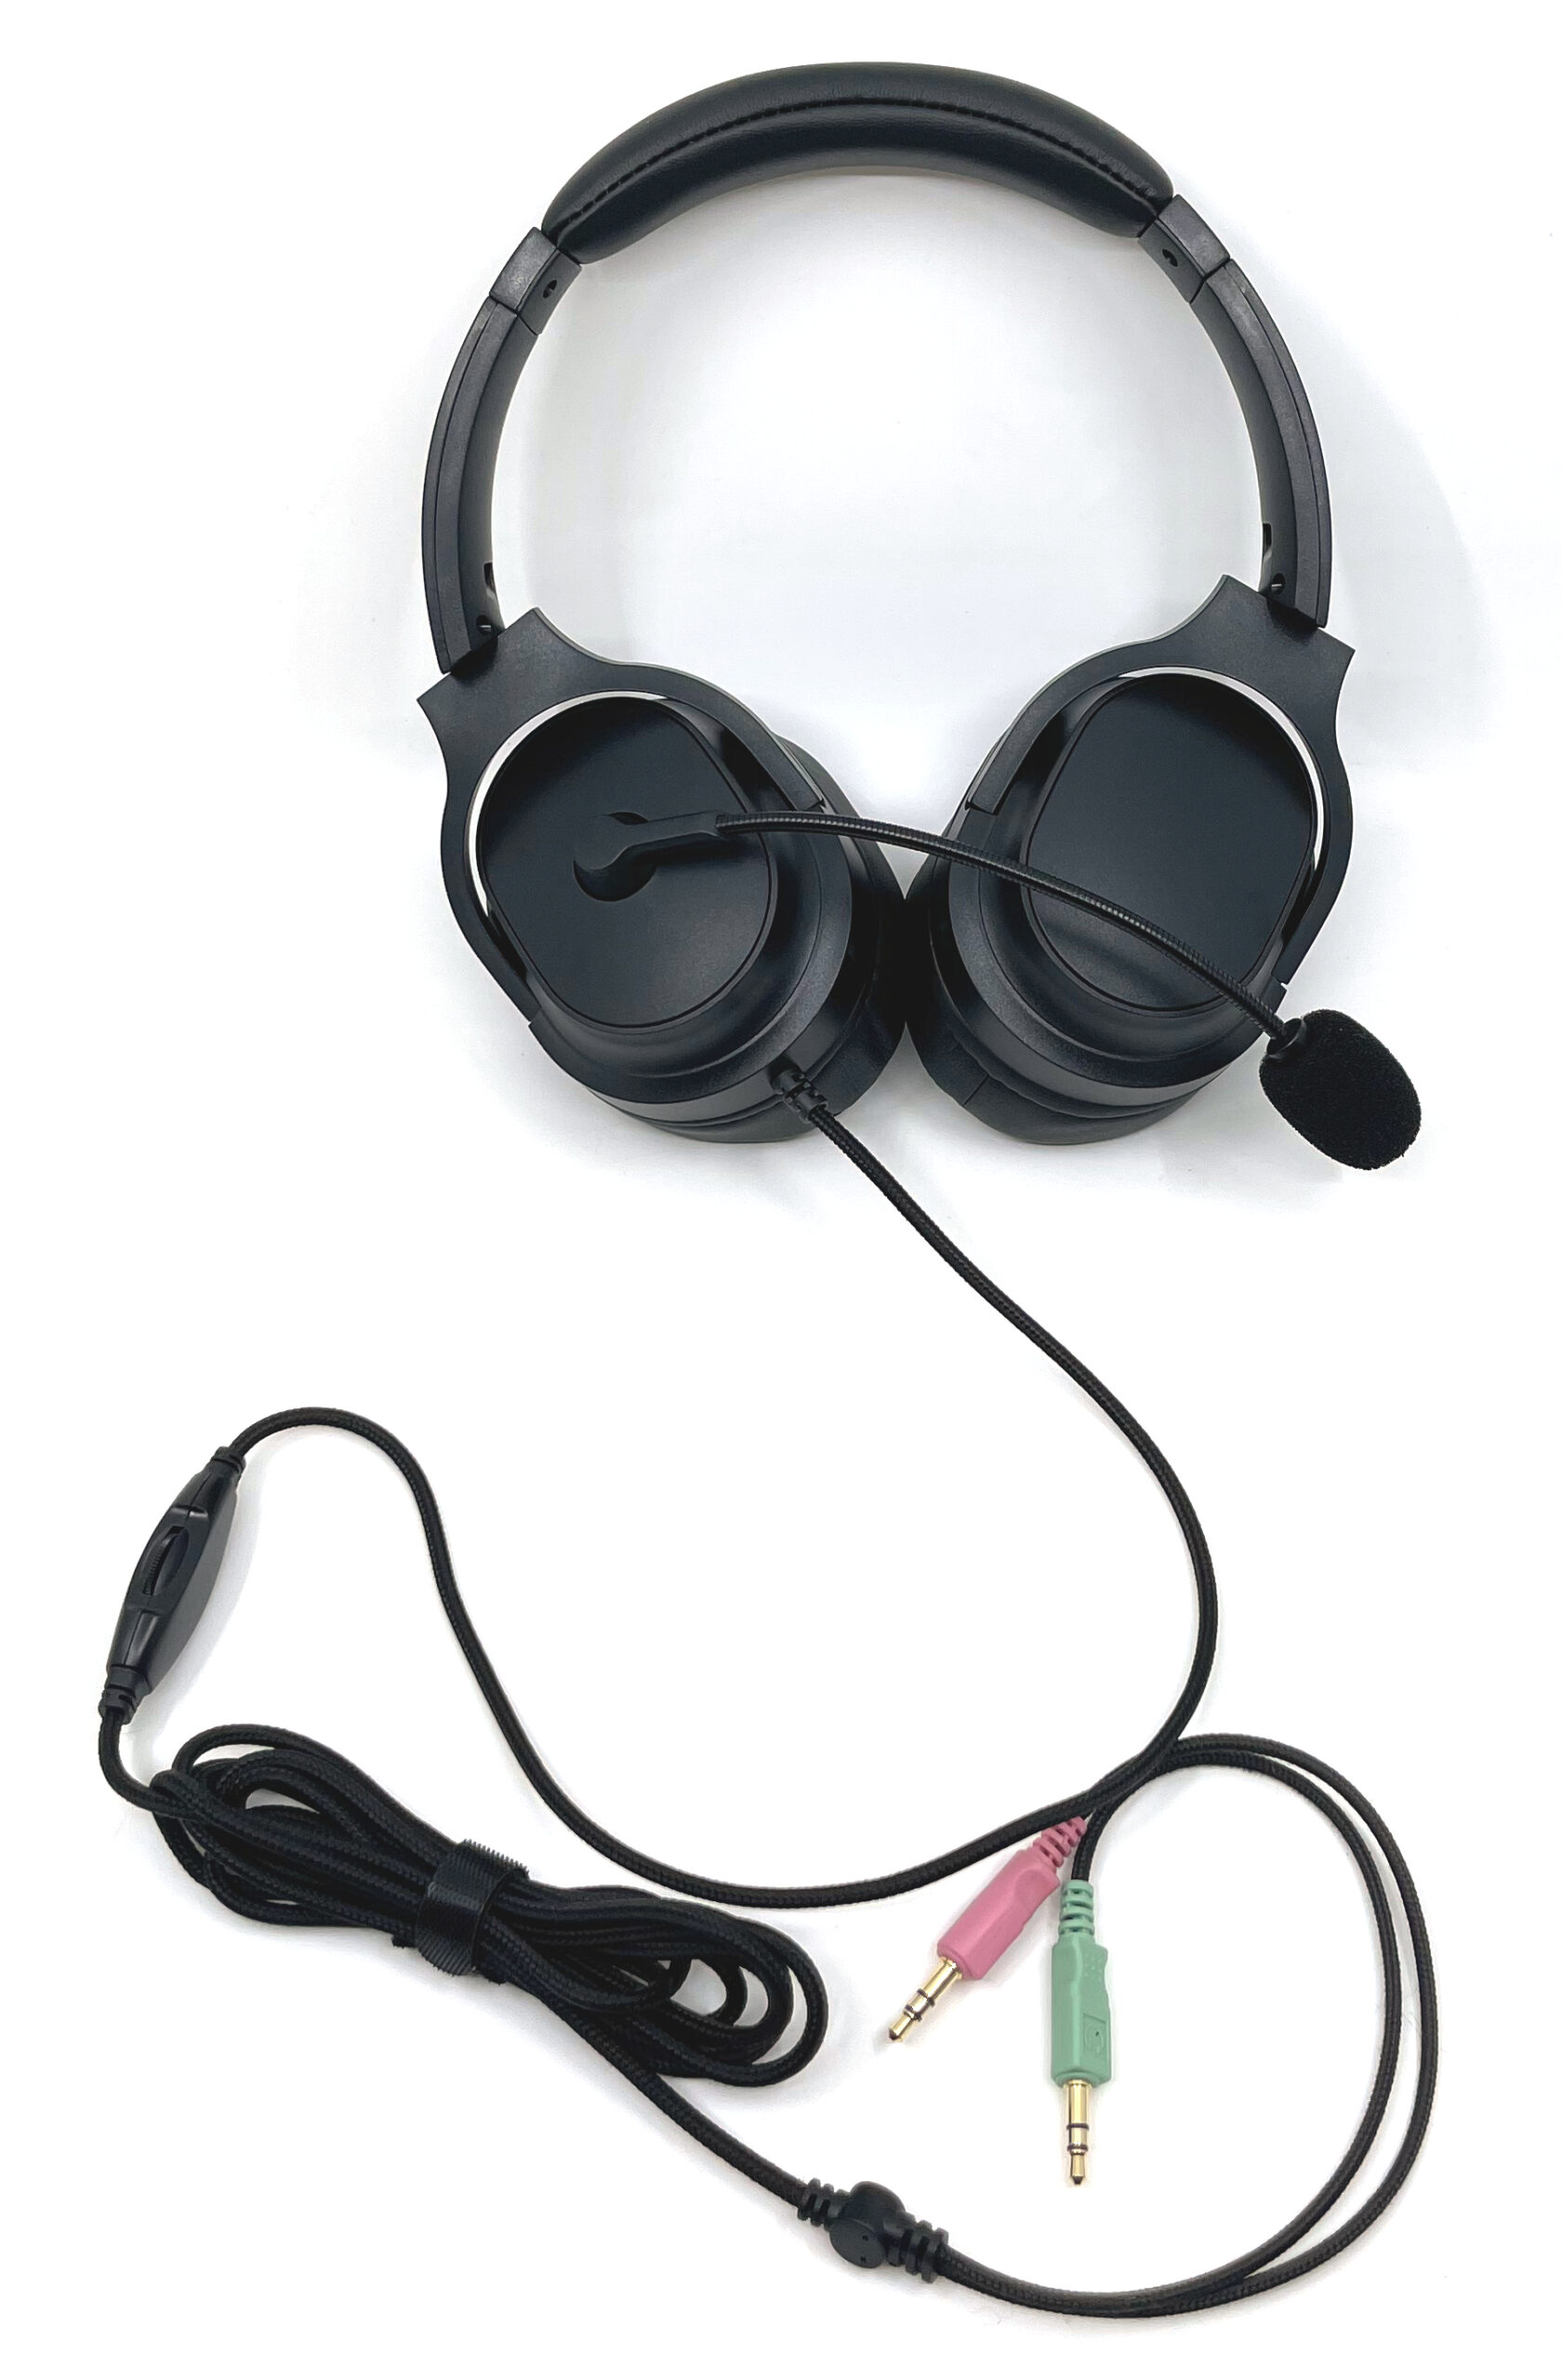 Half-price Special! Professional Closed-Back Ultra-Lightweight Studio Monitor Headset